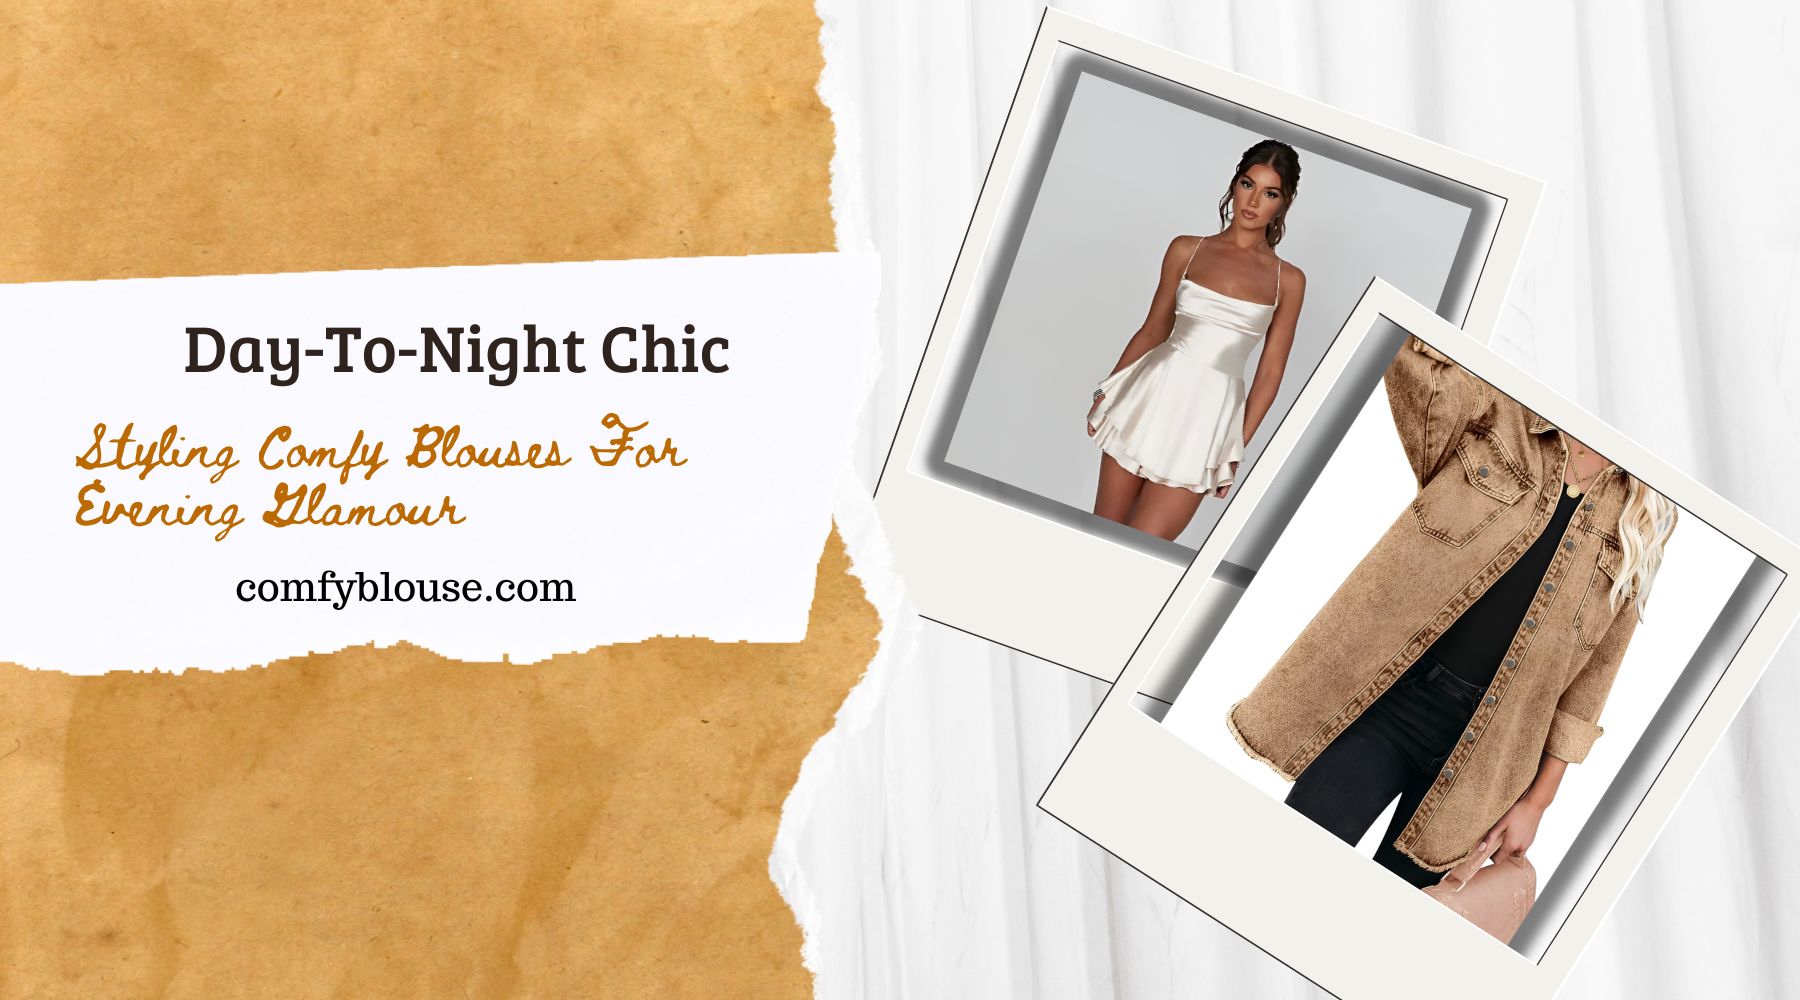 Day-To-Night Chic: Styling Comfy Blouses For Evening Glamour